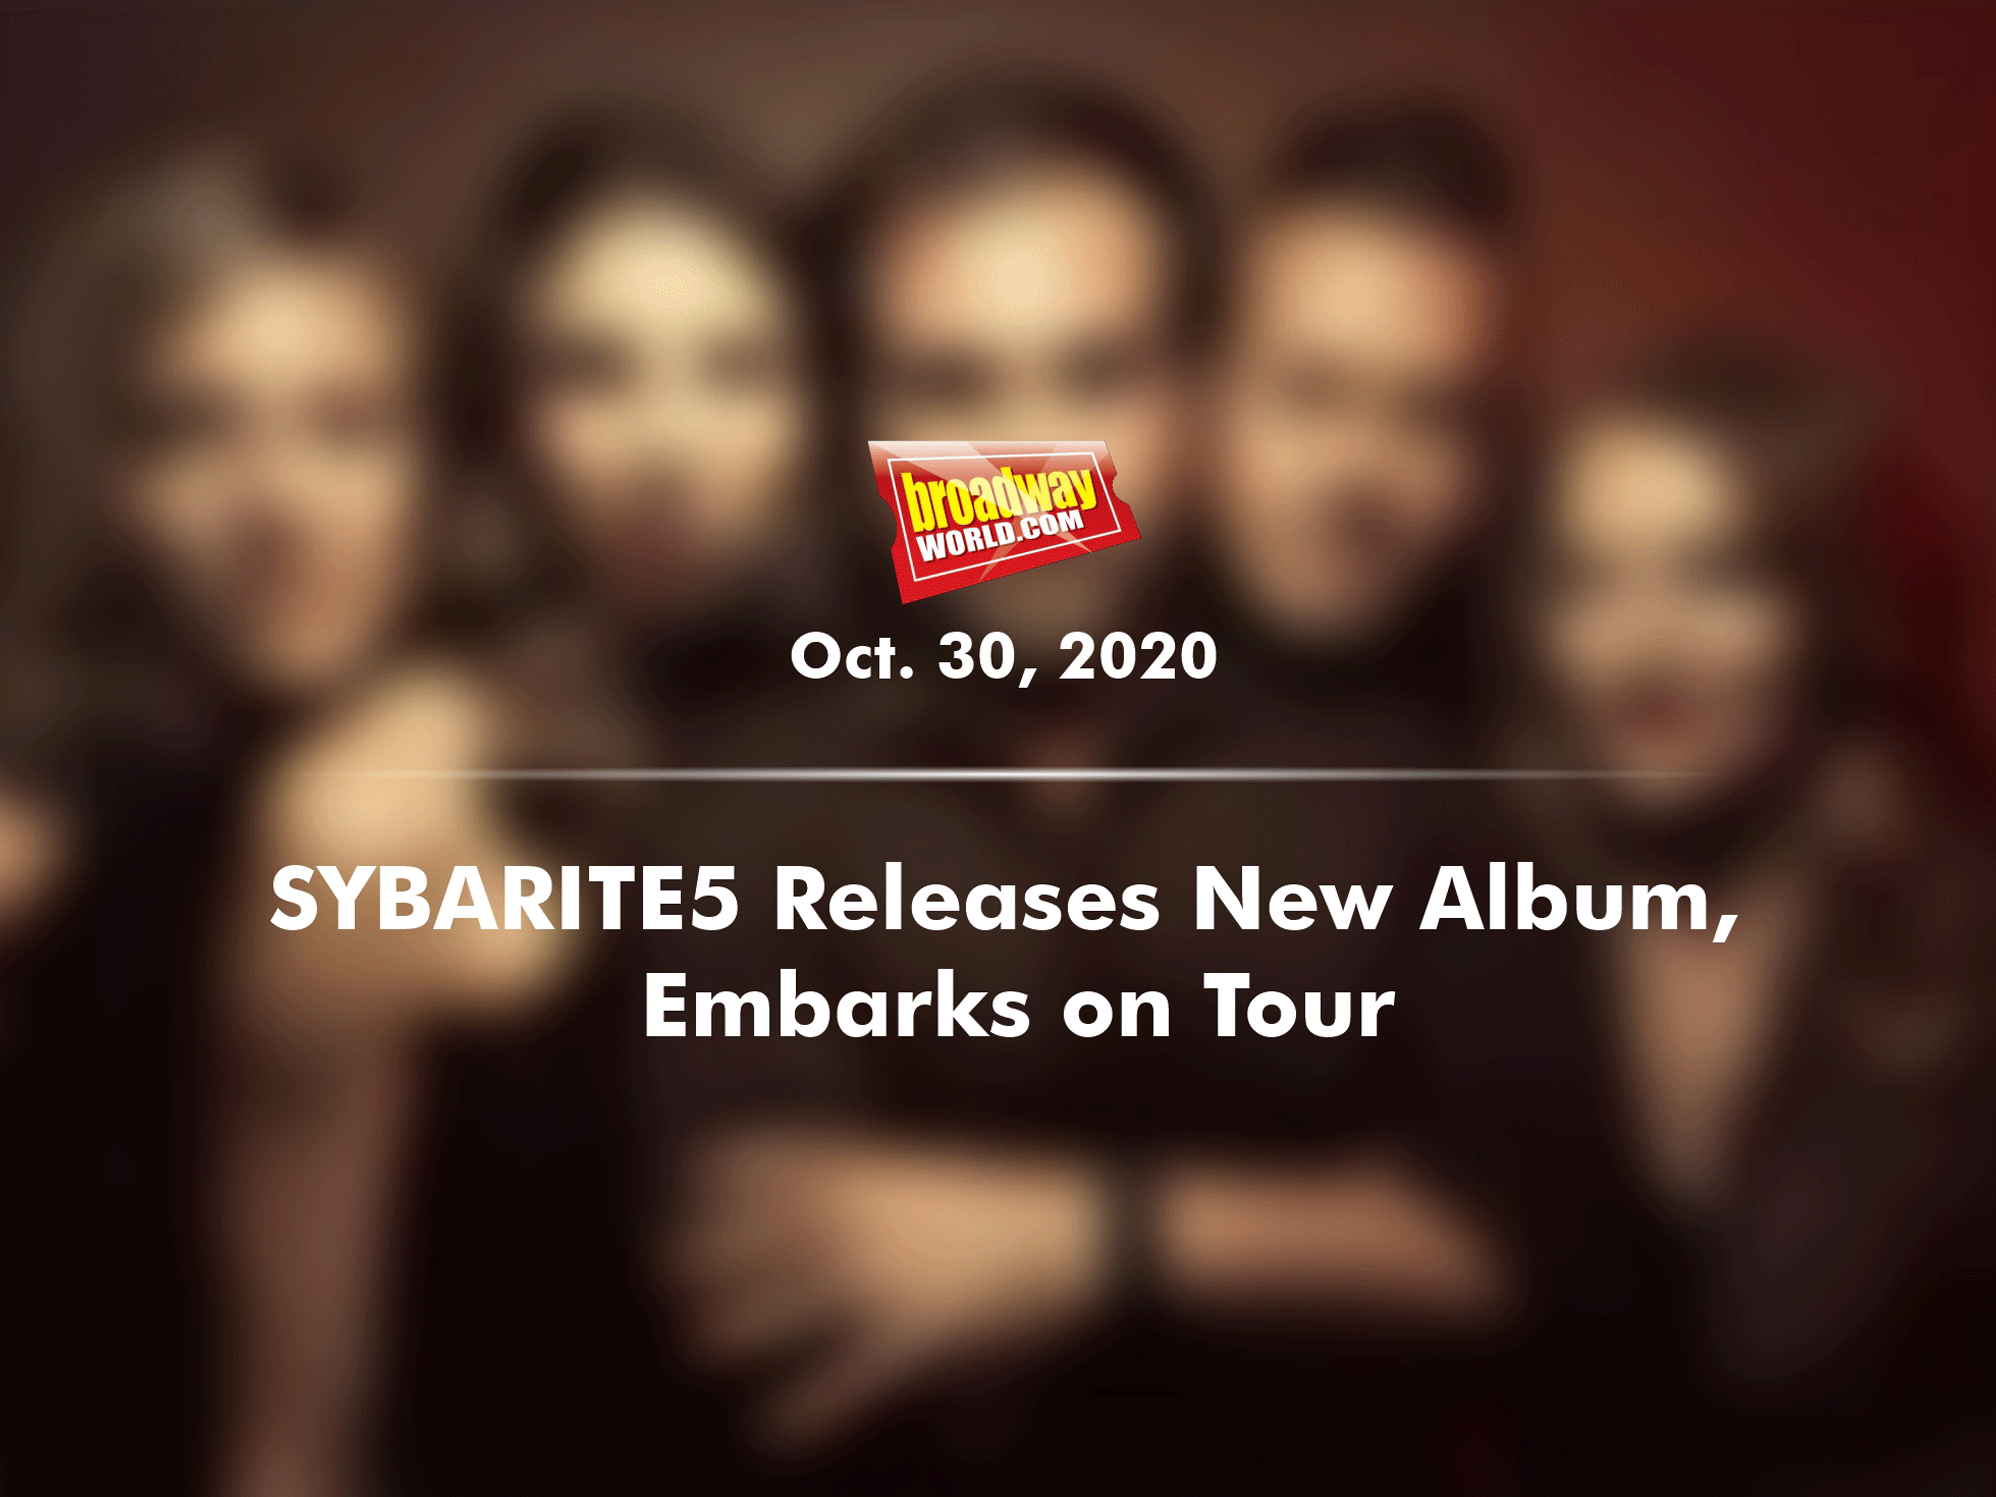 SYBARITE5 Releases New Album, Embarks on Tour